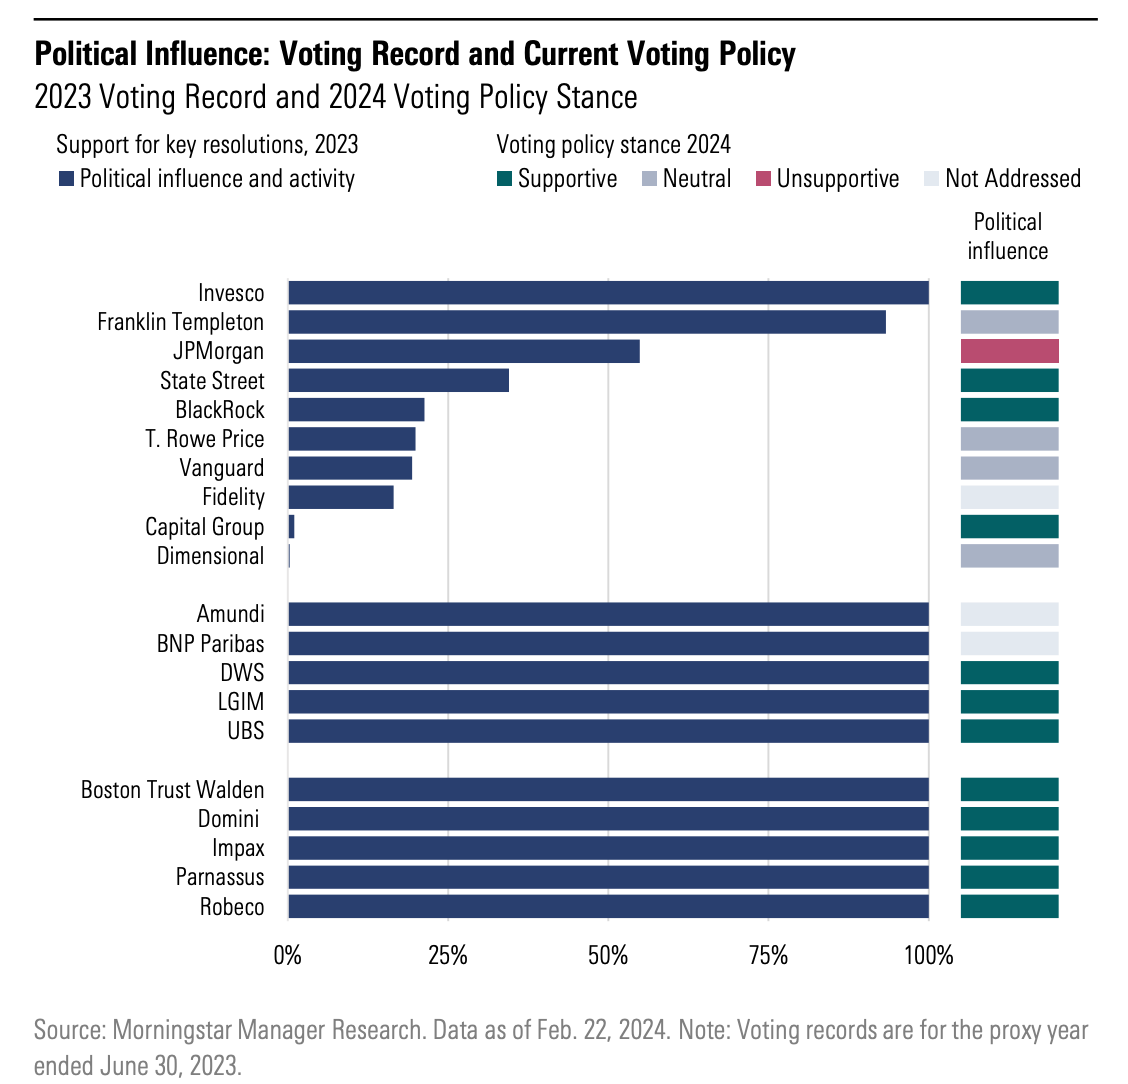 Bar graph showing the 2023 voting record for political influence and activity and 2024 voting policy stance on political influence from large US managers, European managers, and sustainability-focused managers.